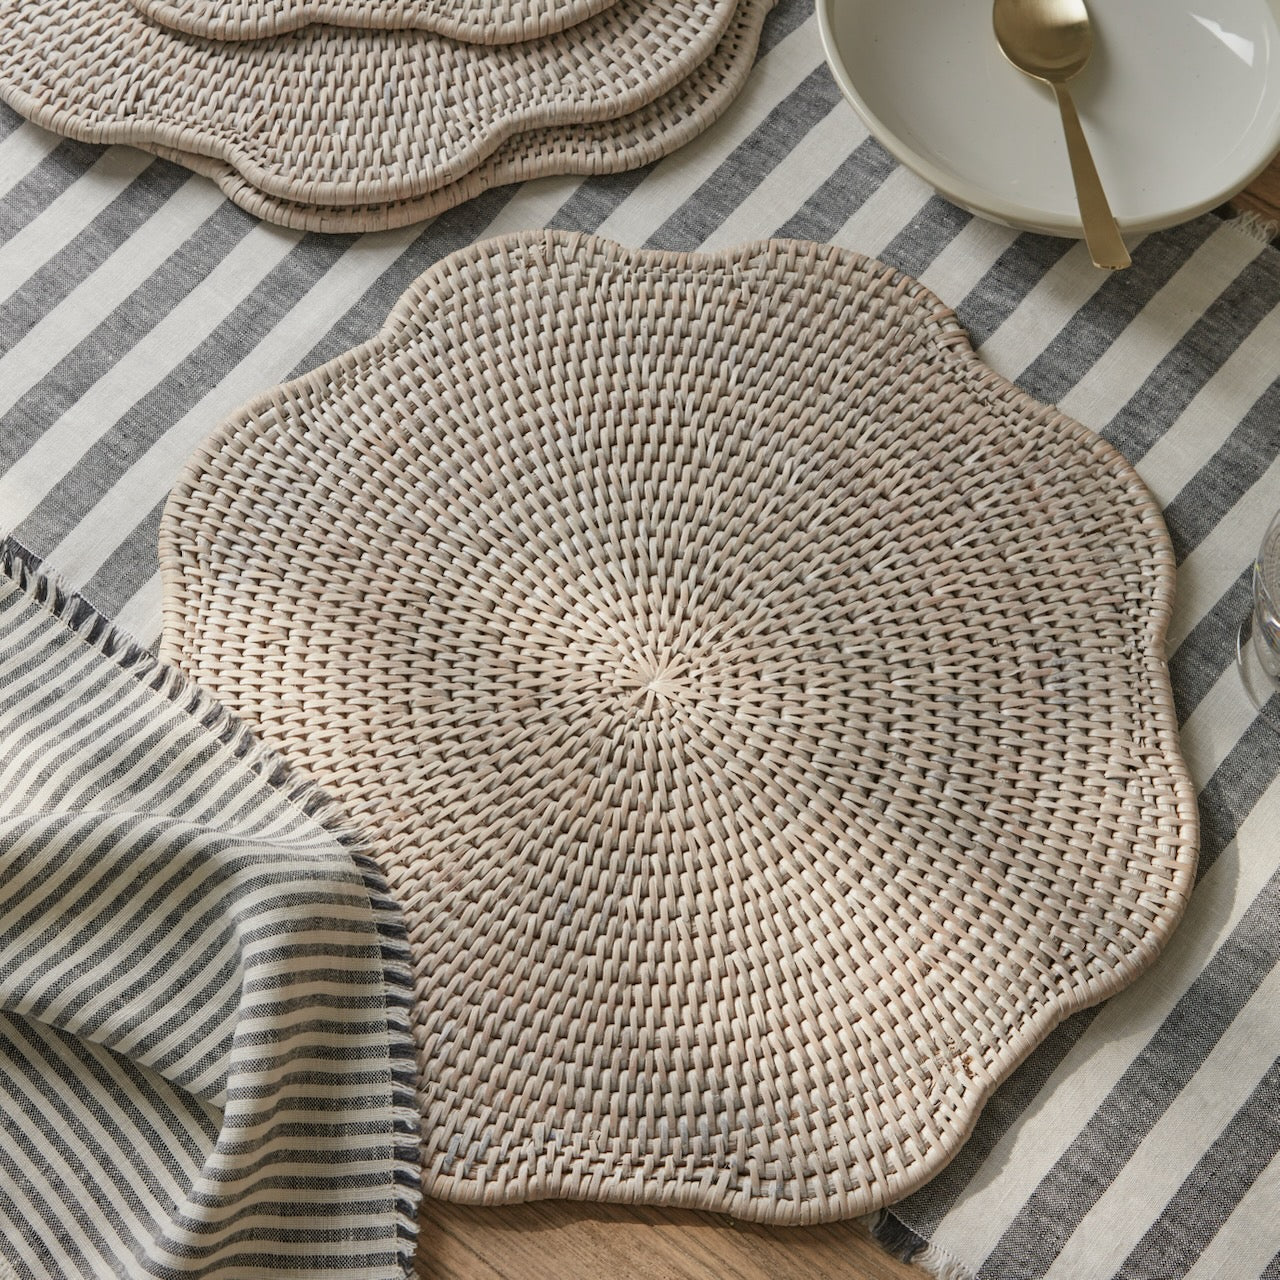 Scallop Edged White Rattan Placemat